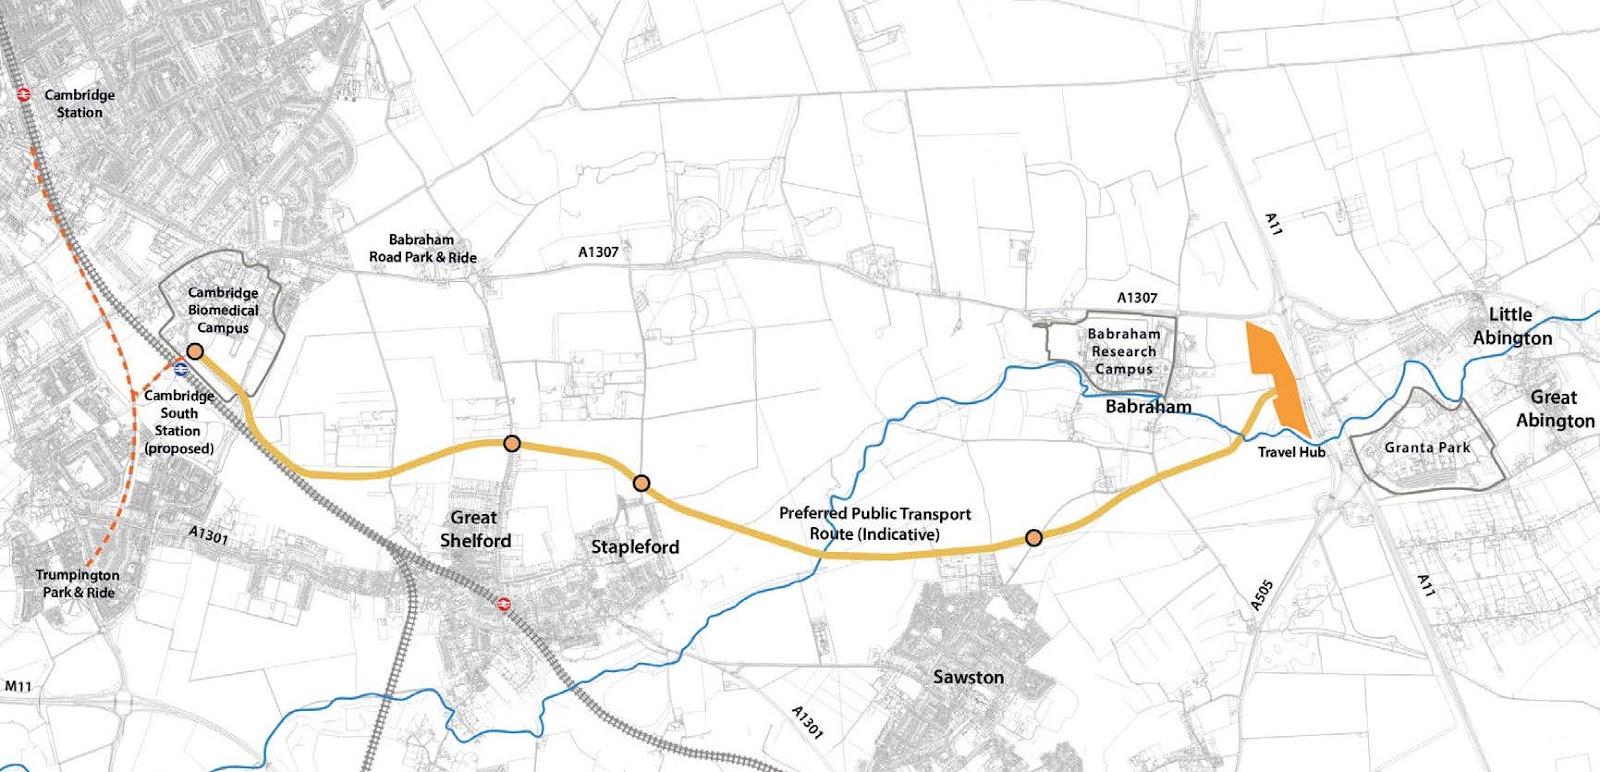 A map showing the proposed alignment for the off road public transport route, from the travel hub, south of Babraham, touching on the north of Sawston, the north of Stapleford, the north of Great Shelford, and meeting up with the planned Cambridge South rail station at the Cambridge Biomedical Campus, near Addenbrookes Hospital